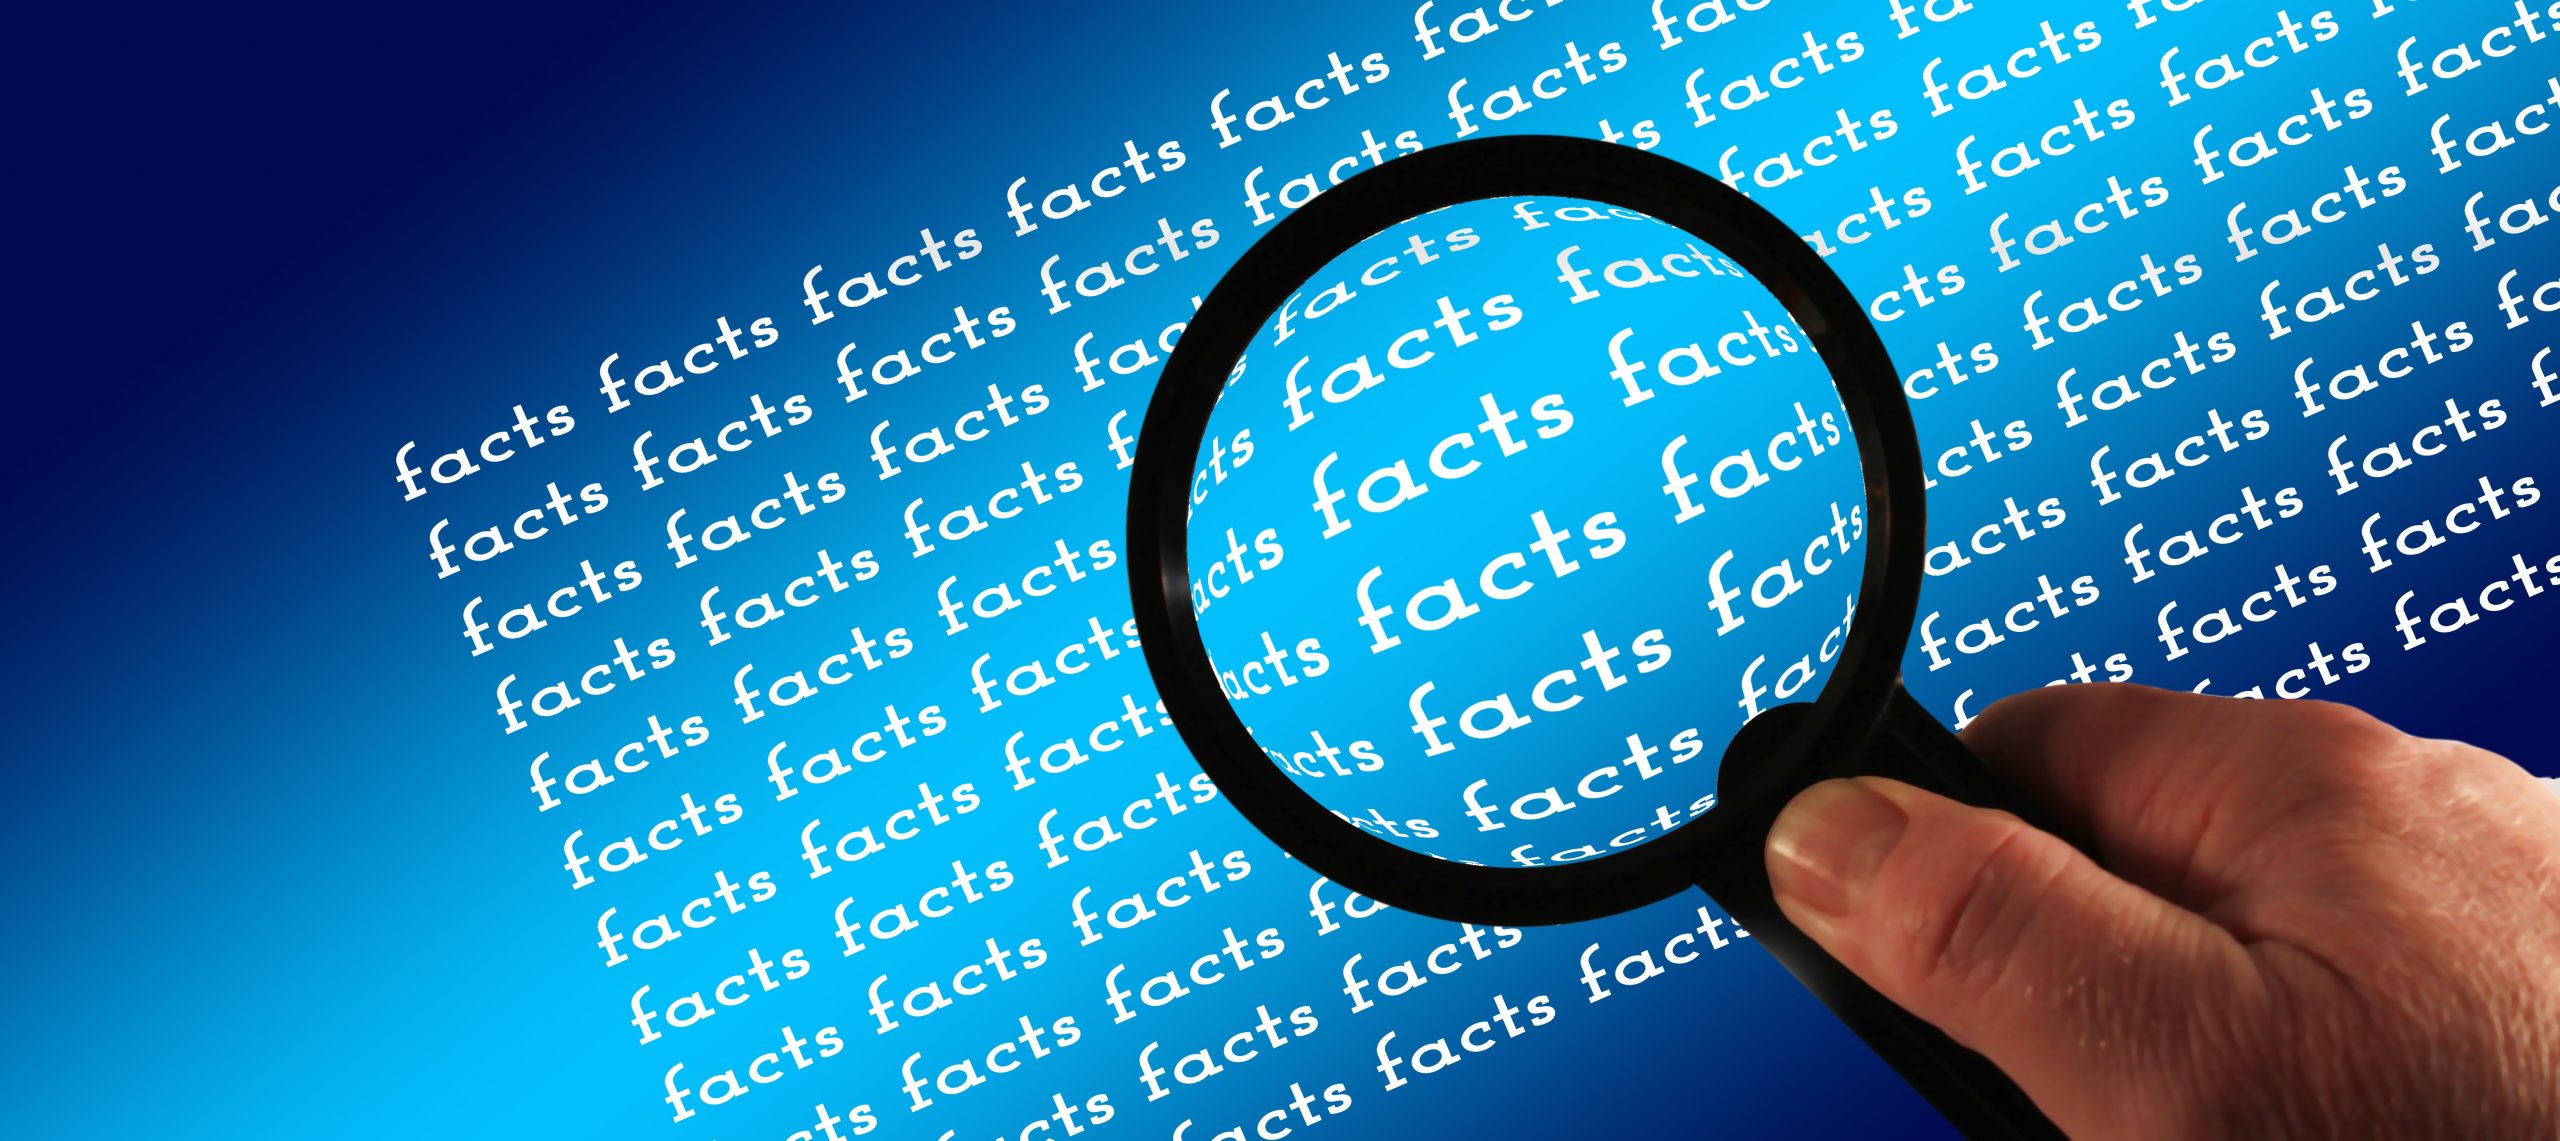 Magnifying glass with text that says "Facts"